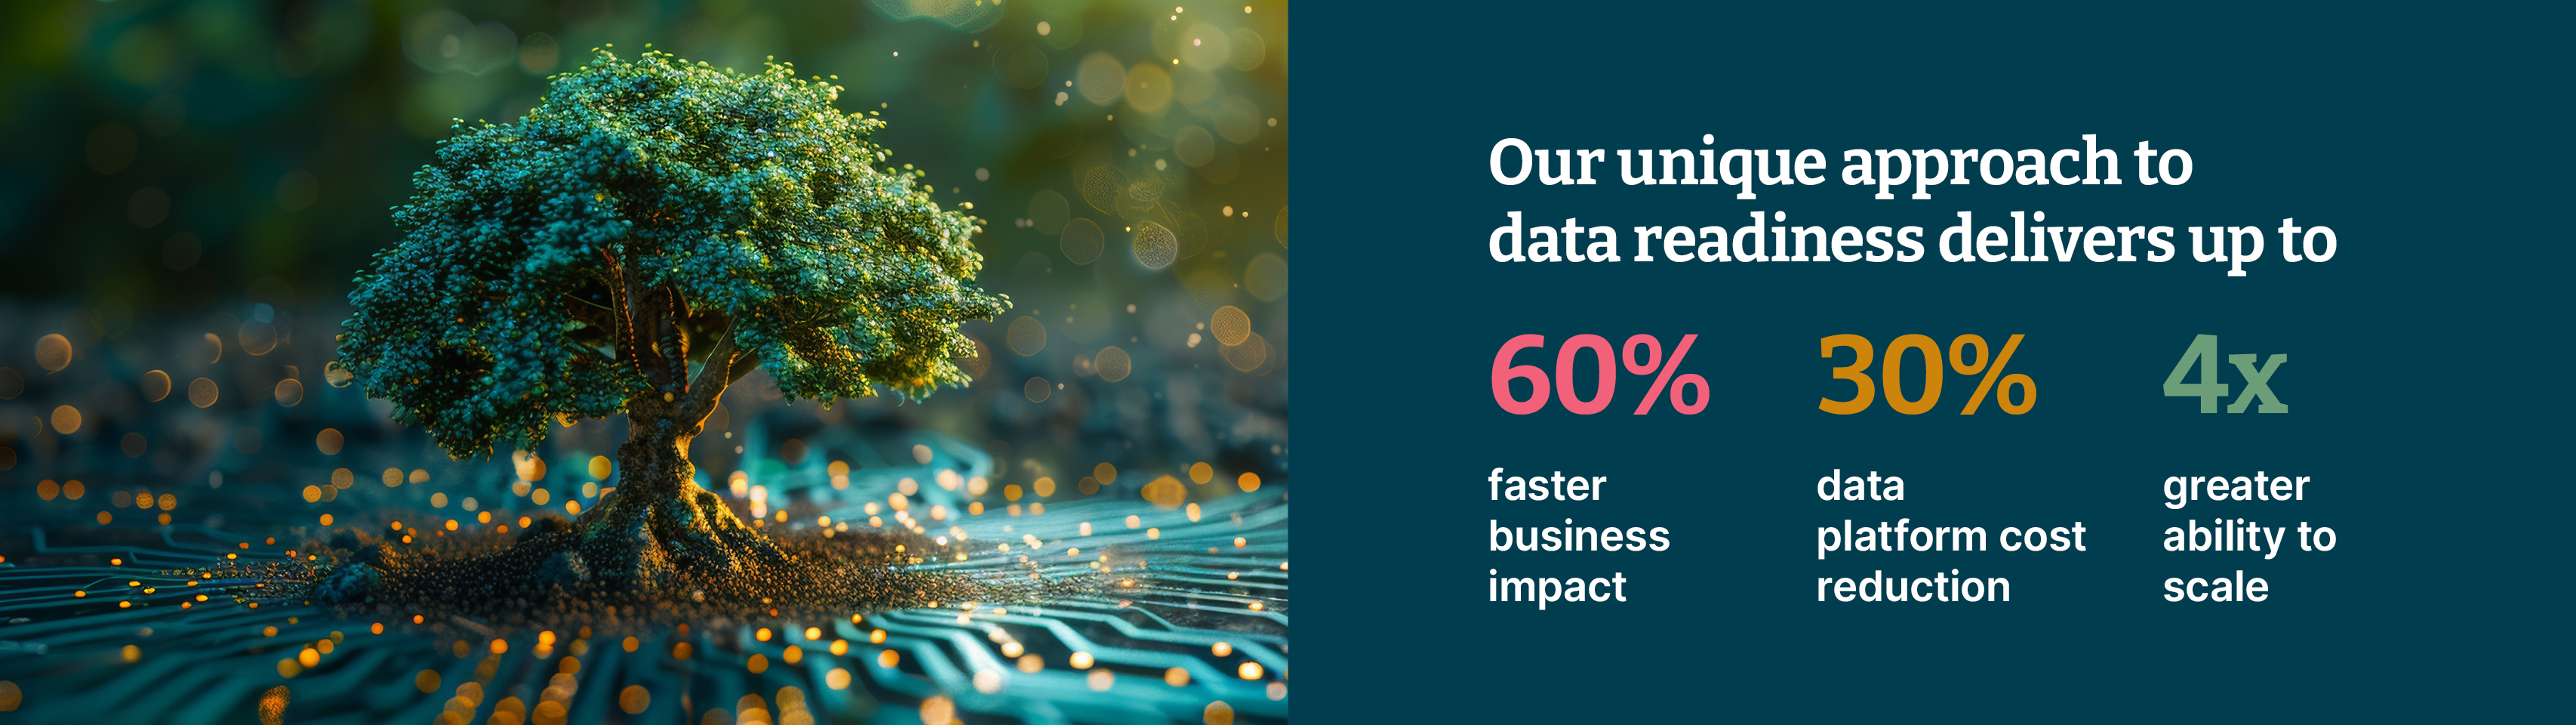  AI generated image  of tree growing out of the digital data. Our unique approach to data readiness delivers up to 60% faster business impact, 4x greater ability to scale and 30% data platform cost reduction. 